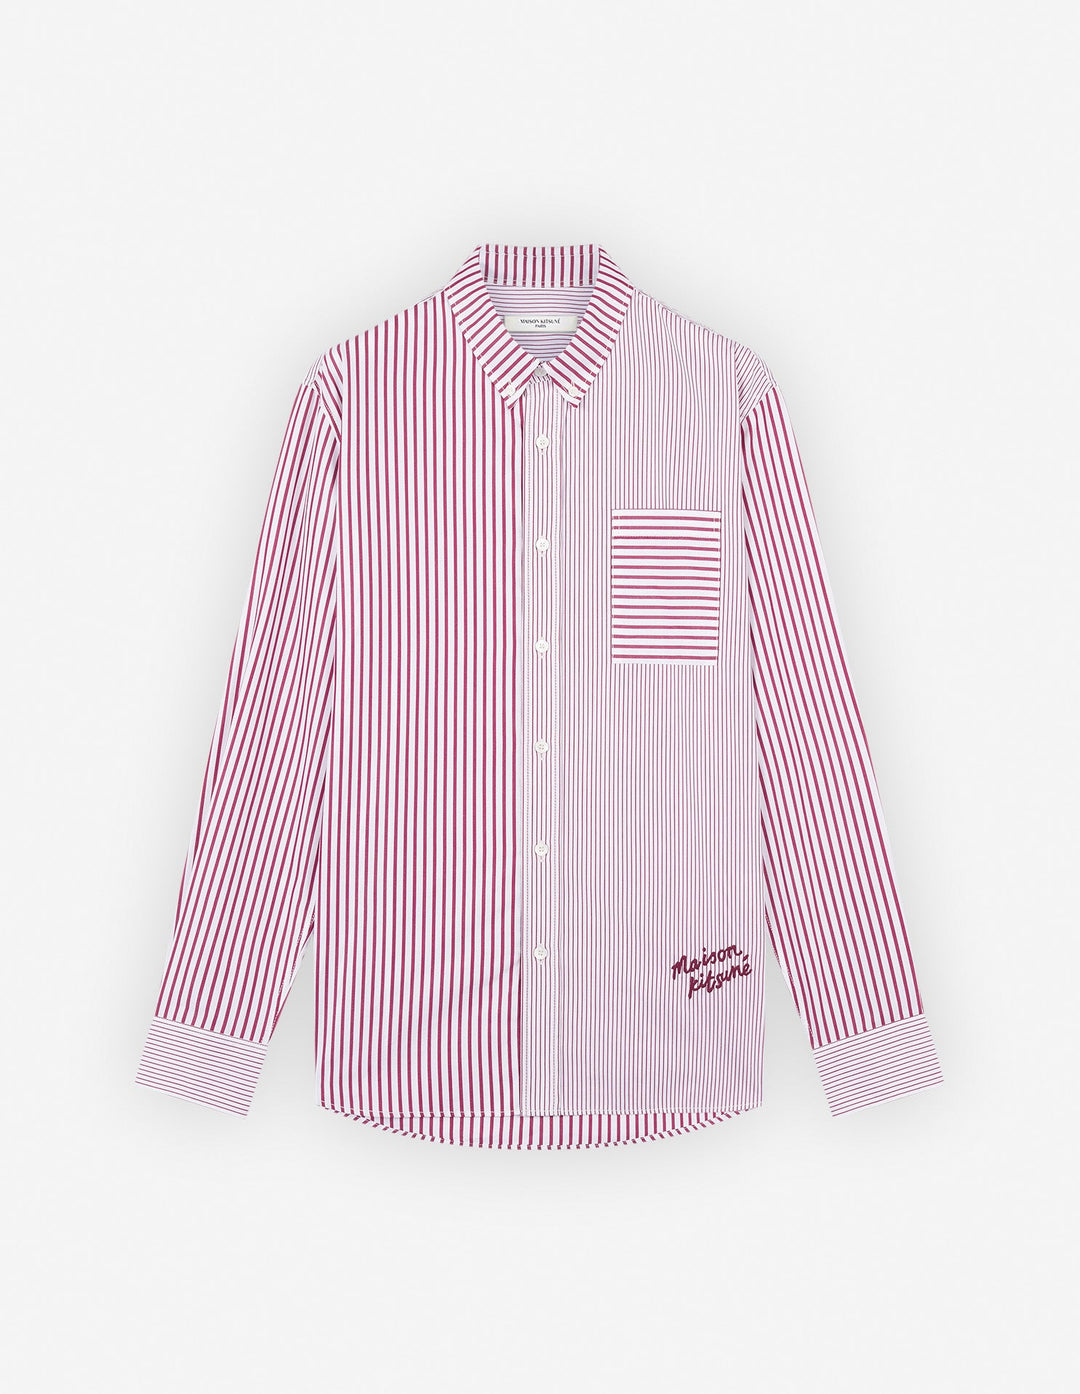 BD CASUAL SHIRT IN STRIPED COTTON WITH LOGO HANDWR